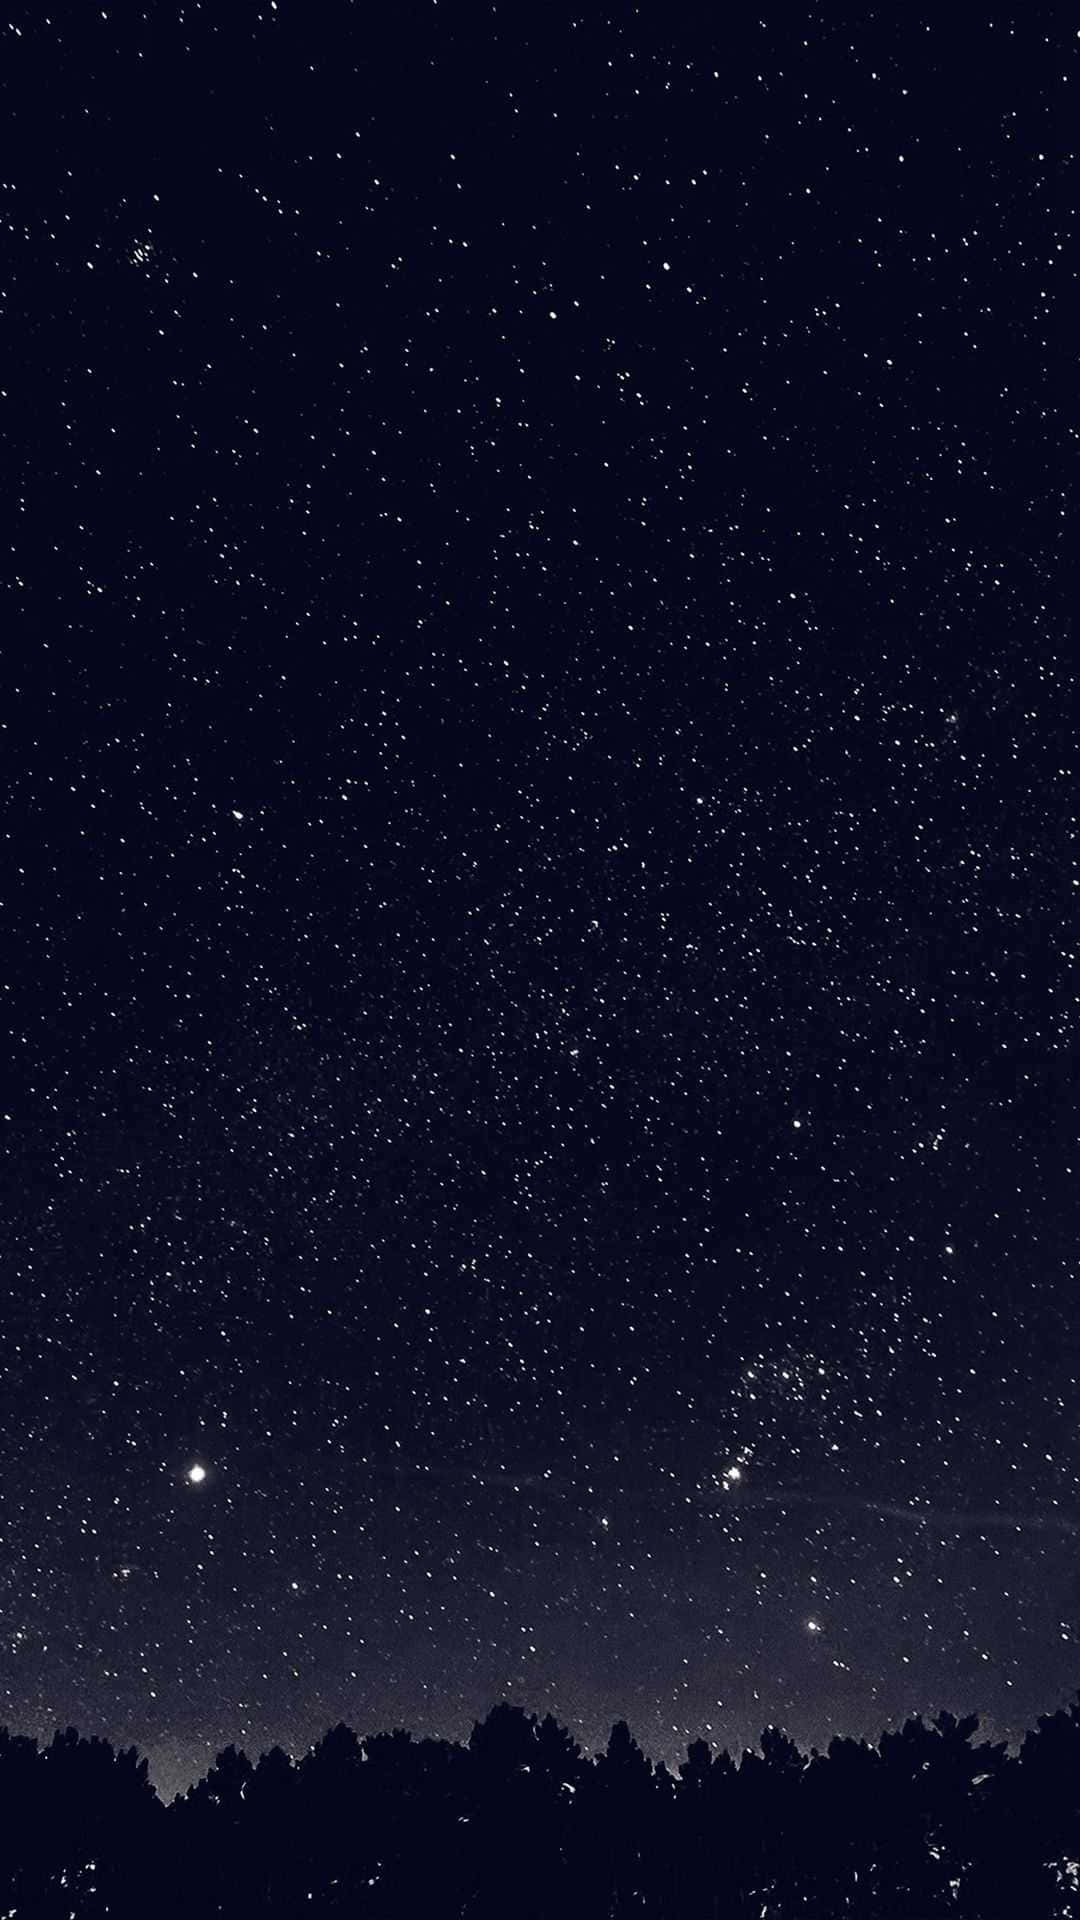 "Let the moon and stars light your way." Wallpaper